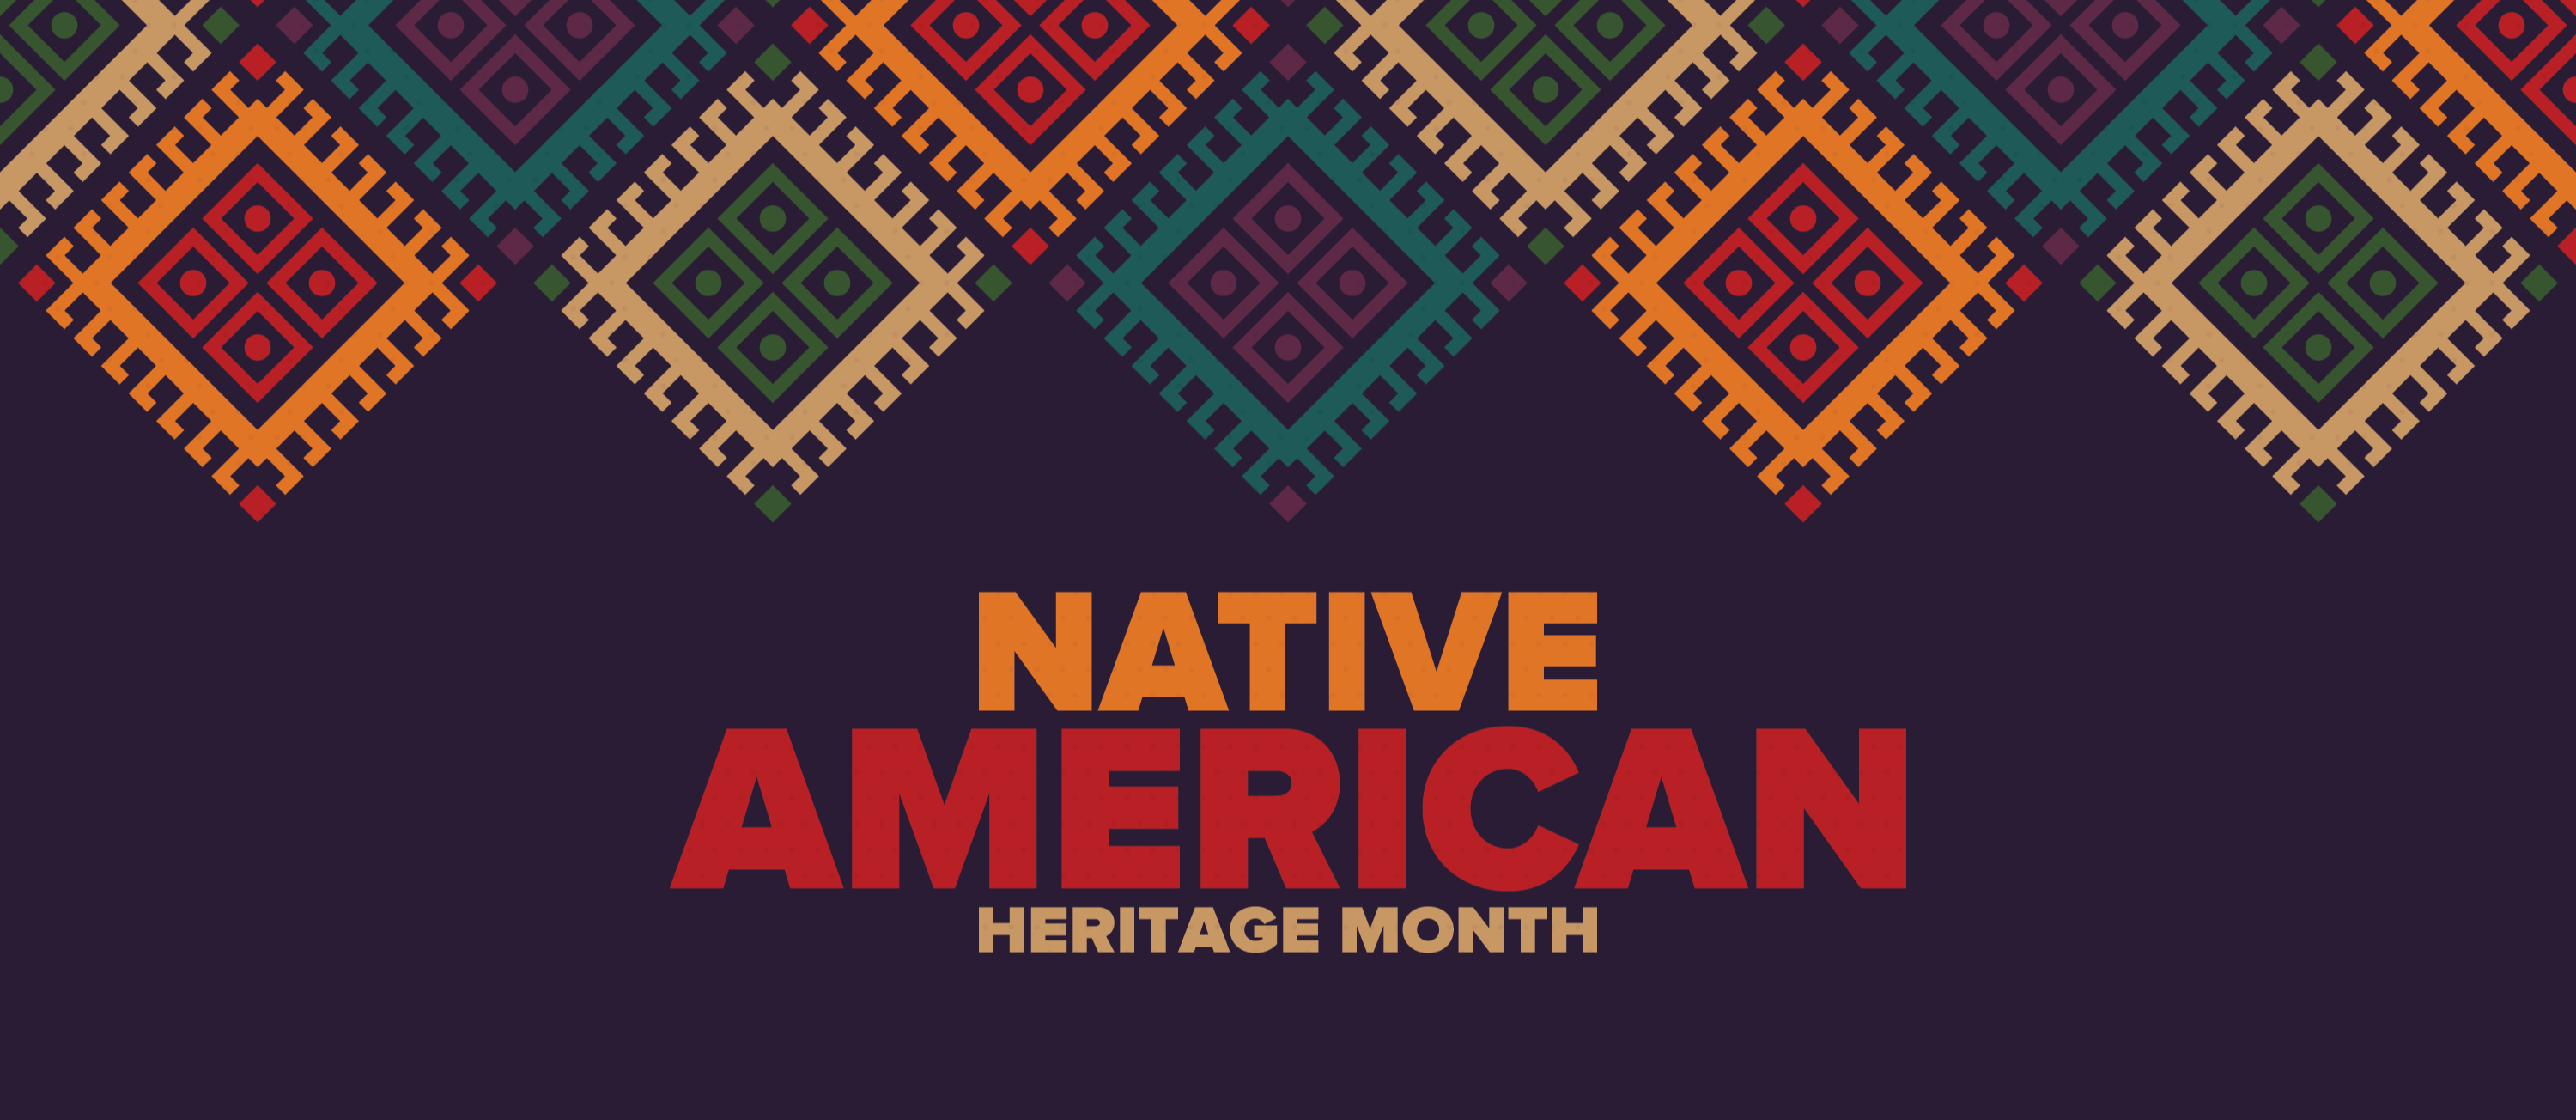 Native American Heritage month